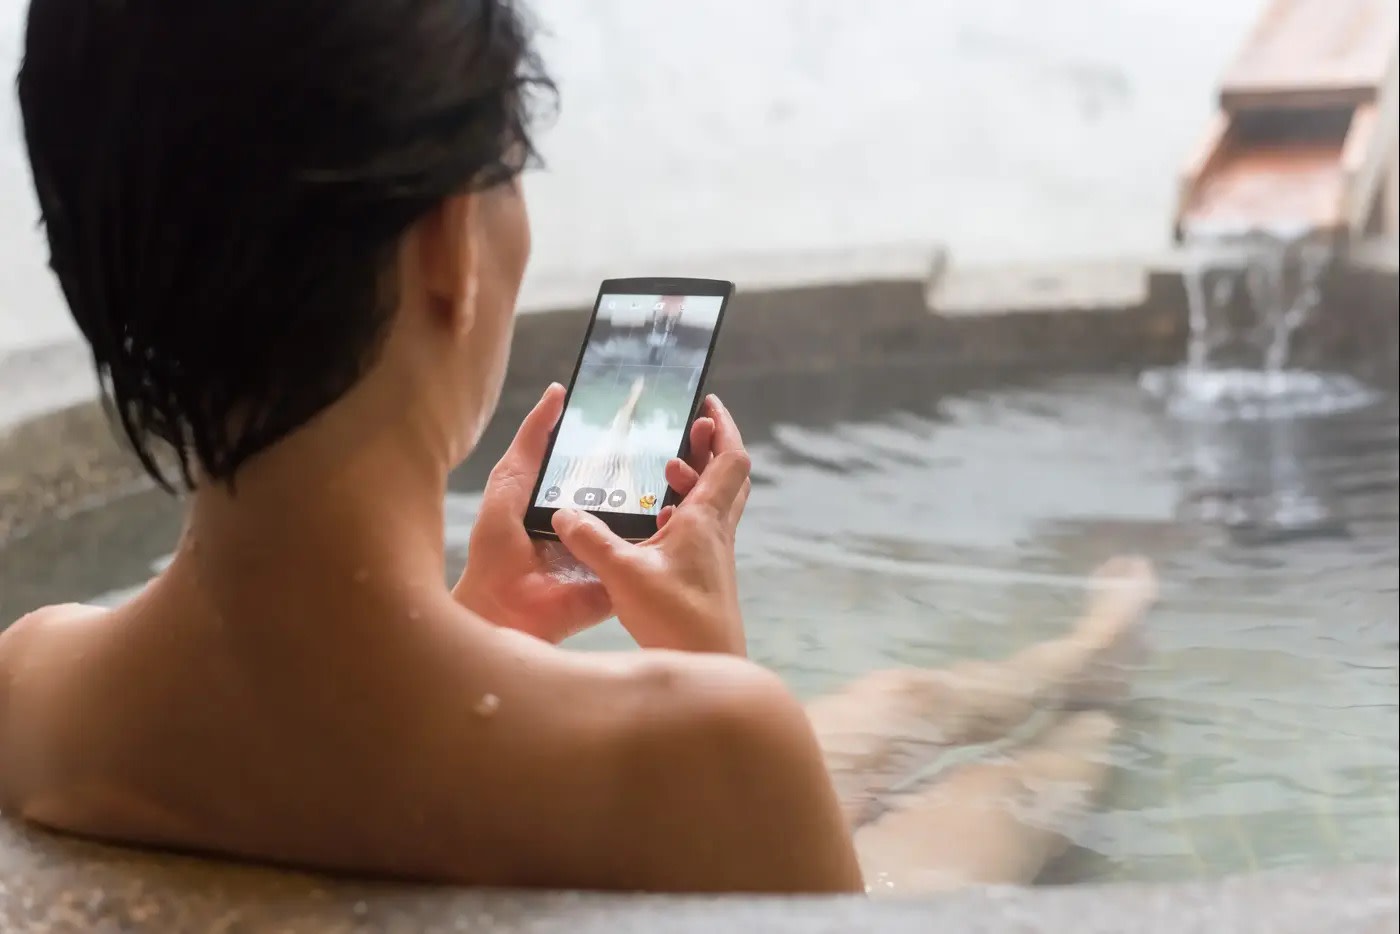 Bath with cellphone (Credit: Shutterstock)